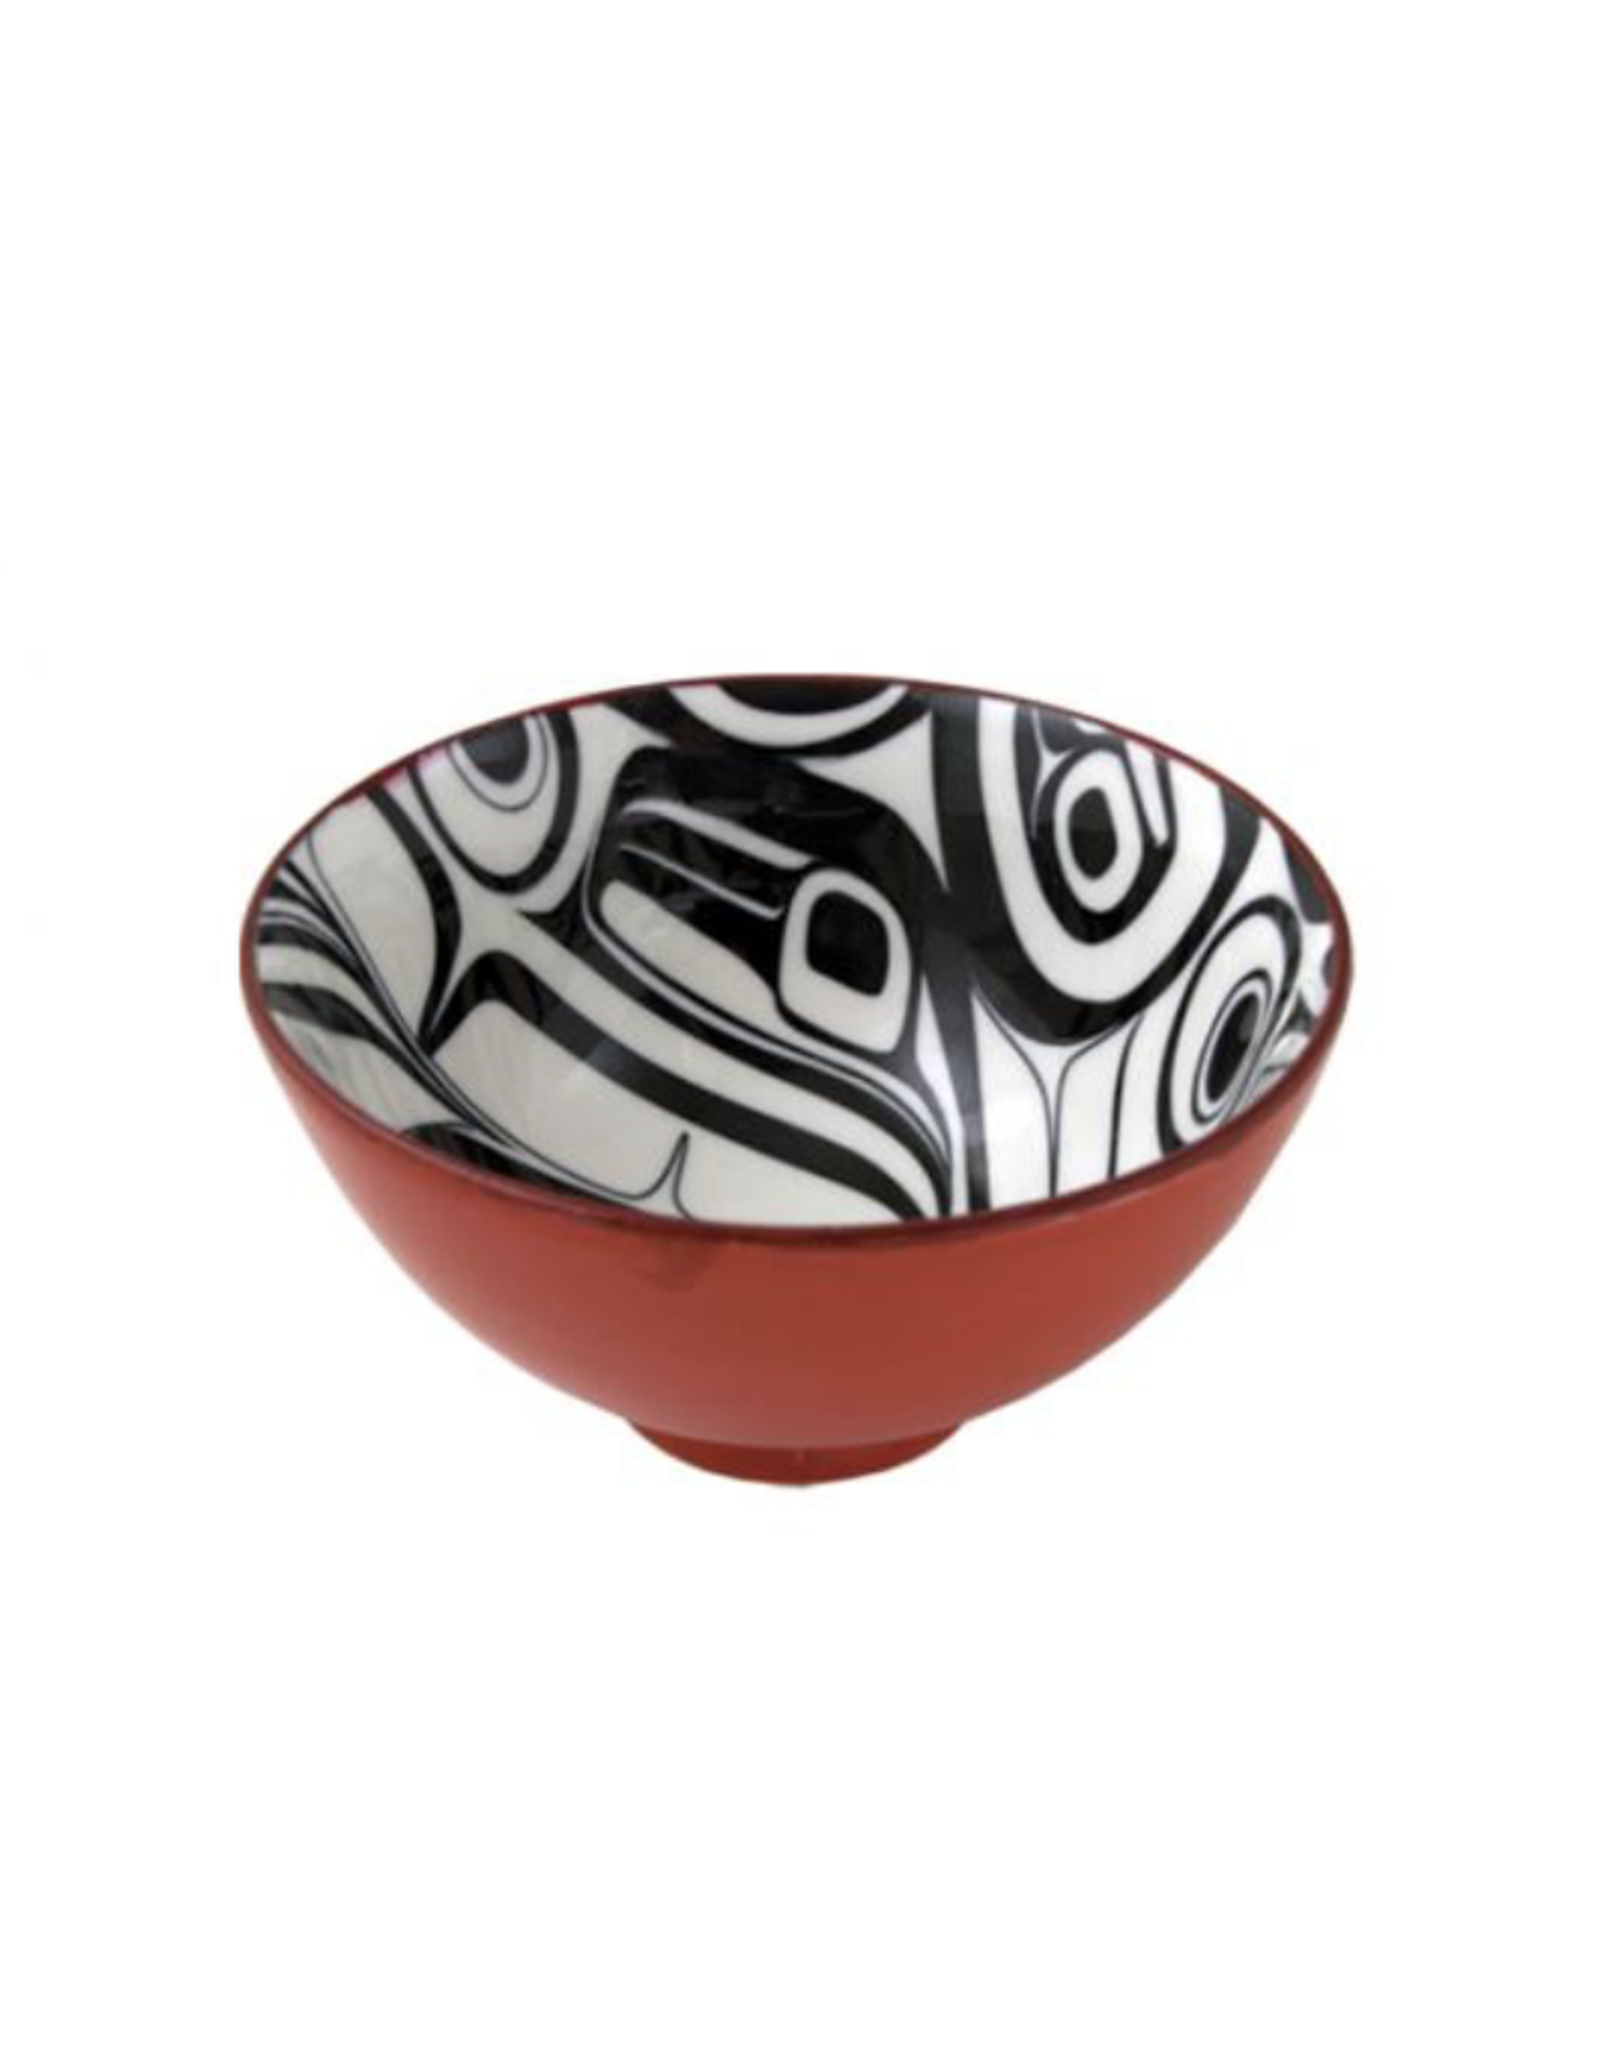 301 Small Bowl - Raven Red/Black